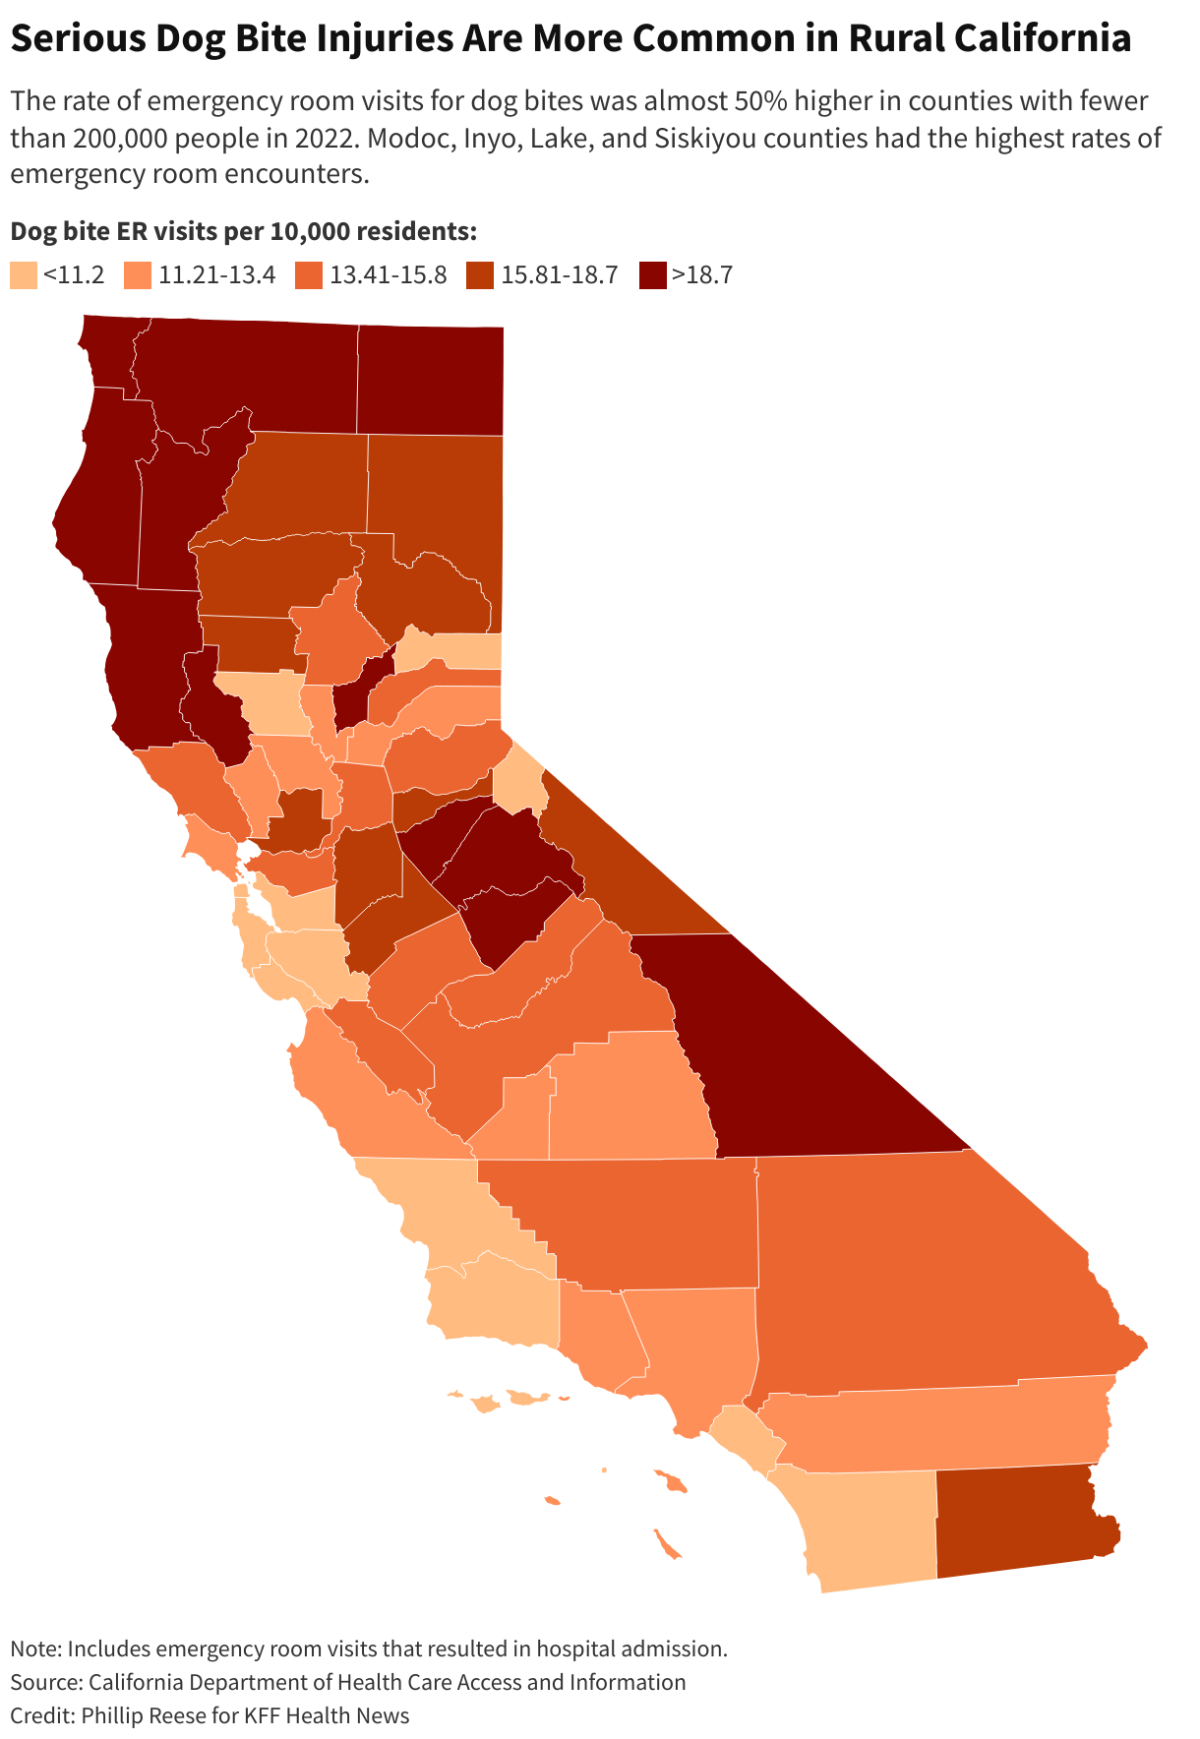 A map showing the rate of ER visits for dog bites in counties throughout California.